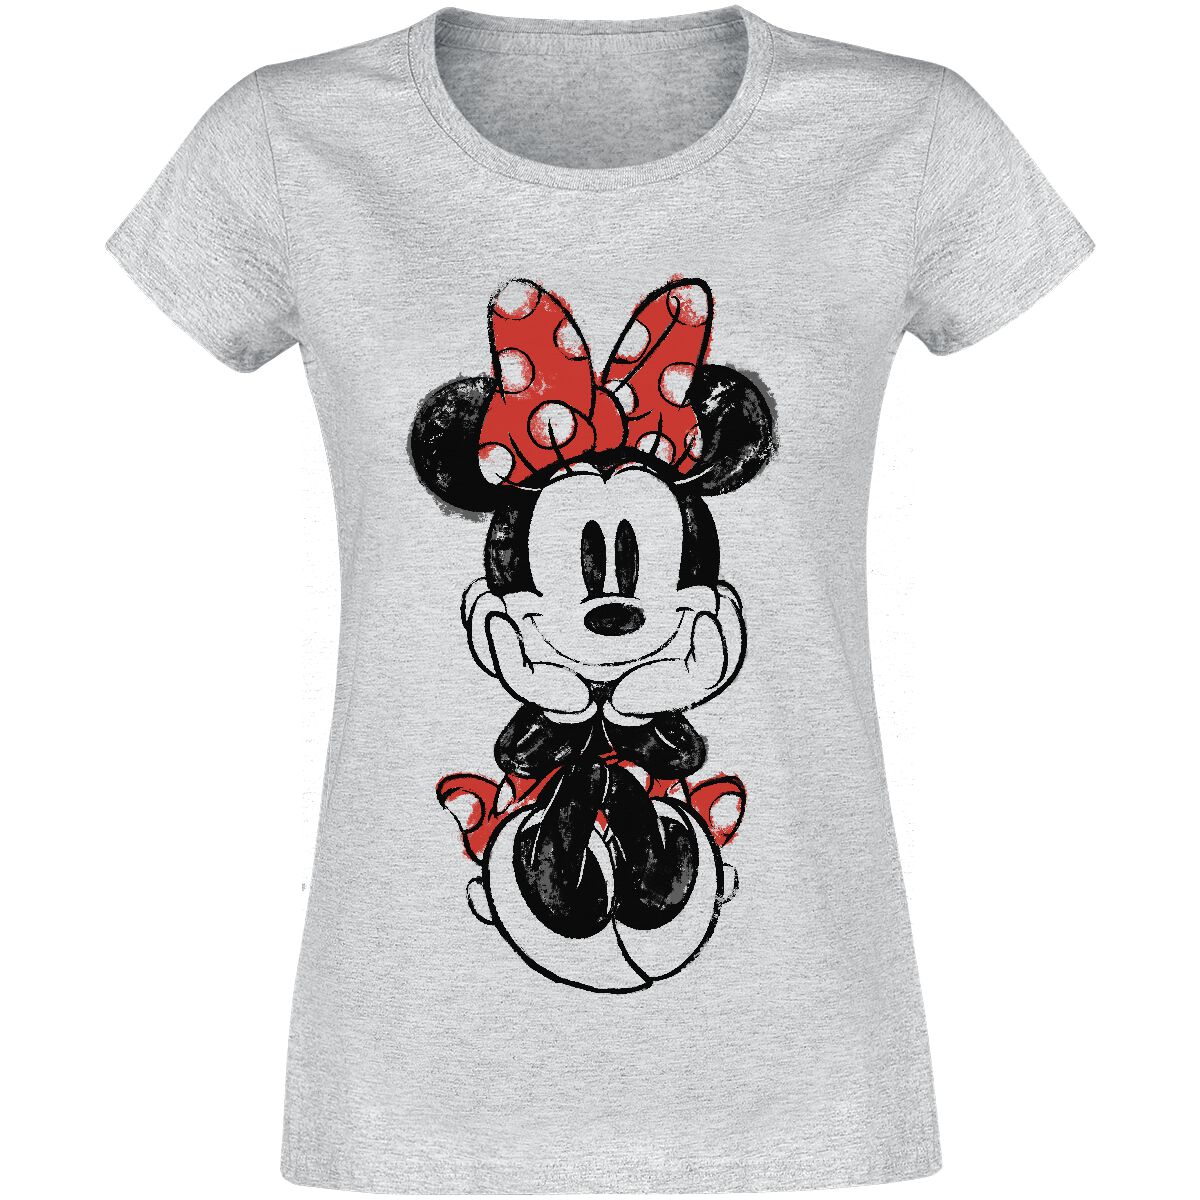 Mickey Mouse Minnie Maus T-Shirt grau in M von Mickey Mouse